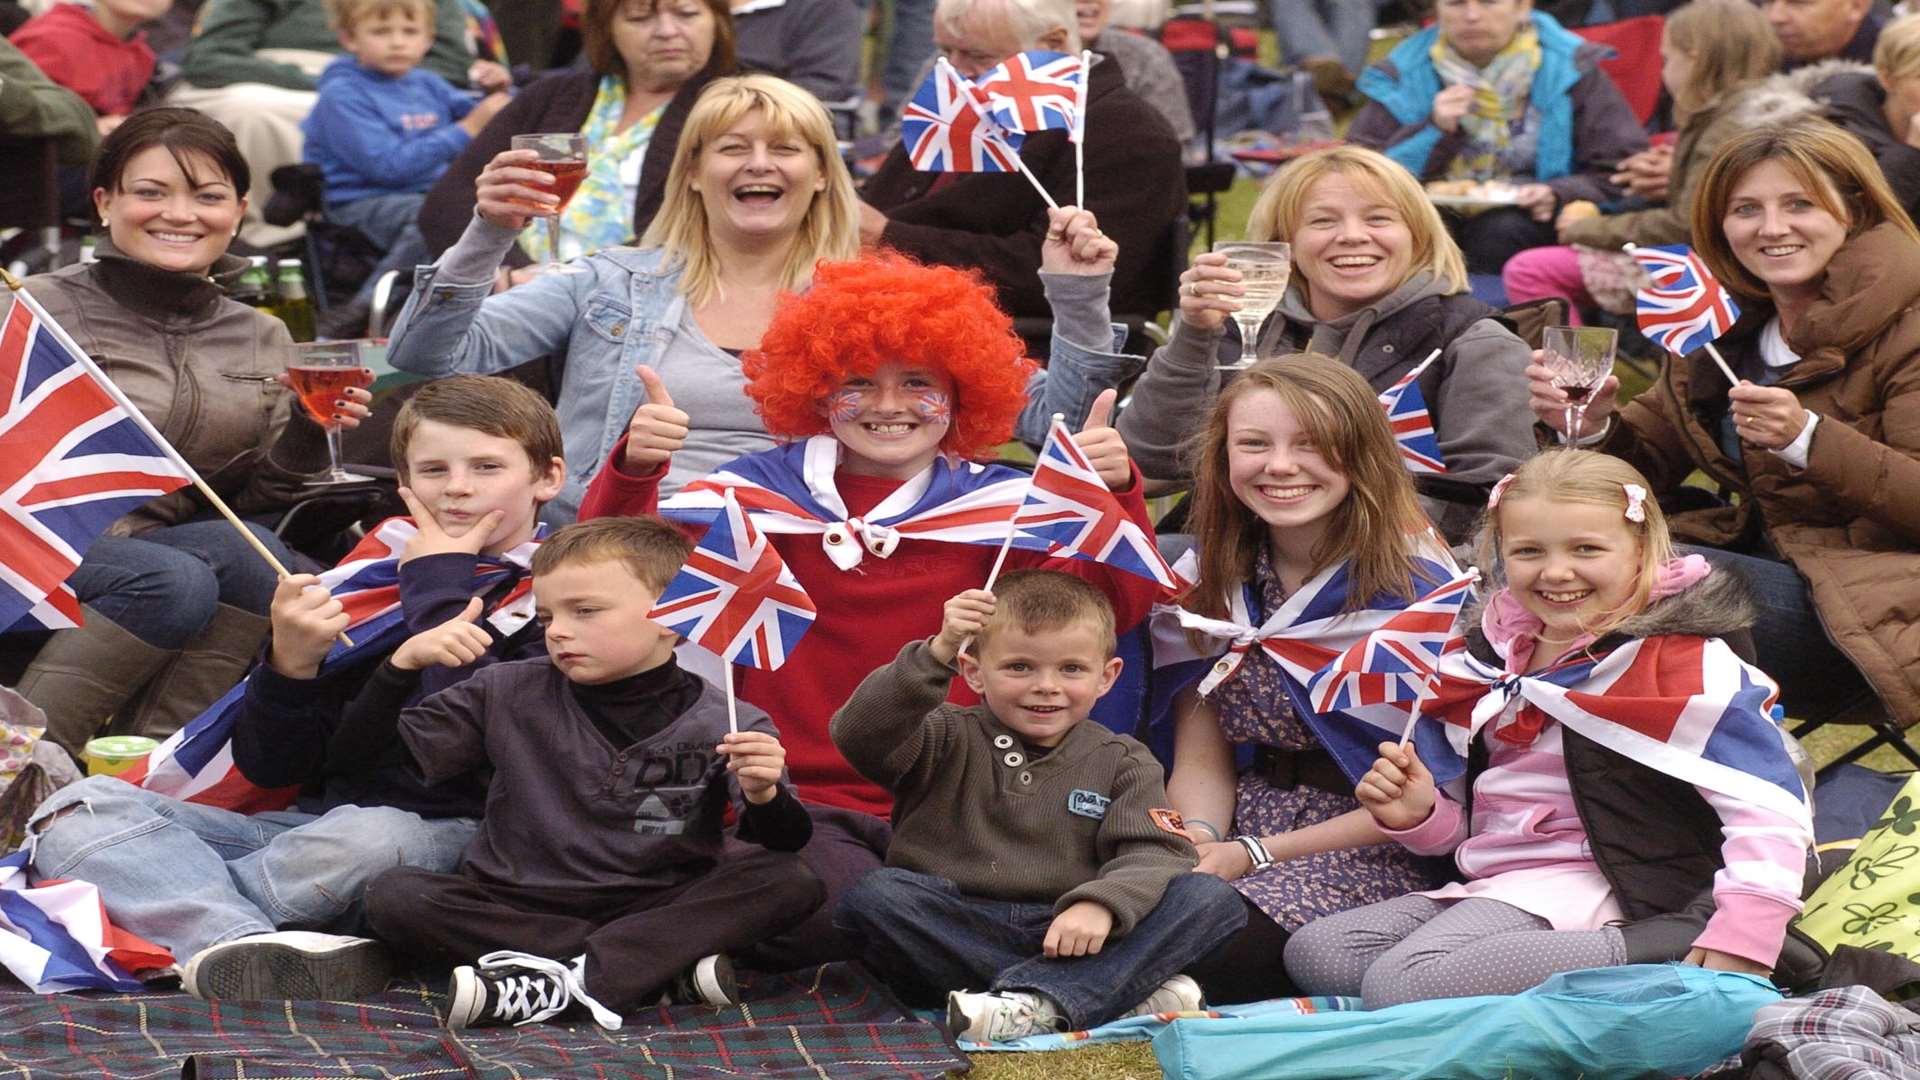 Free family fun at Maidstone Proms in the Park